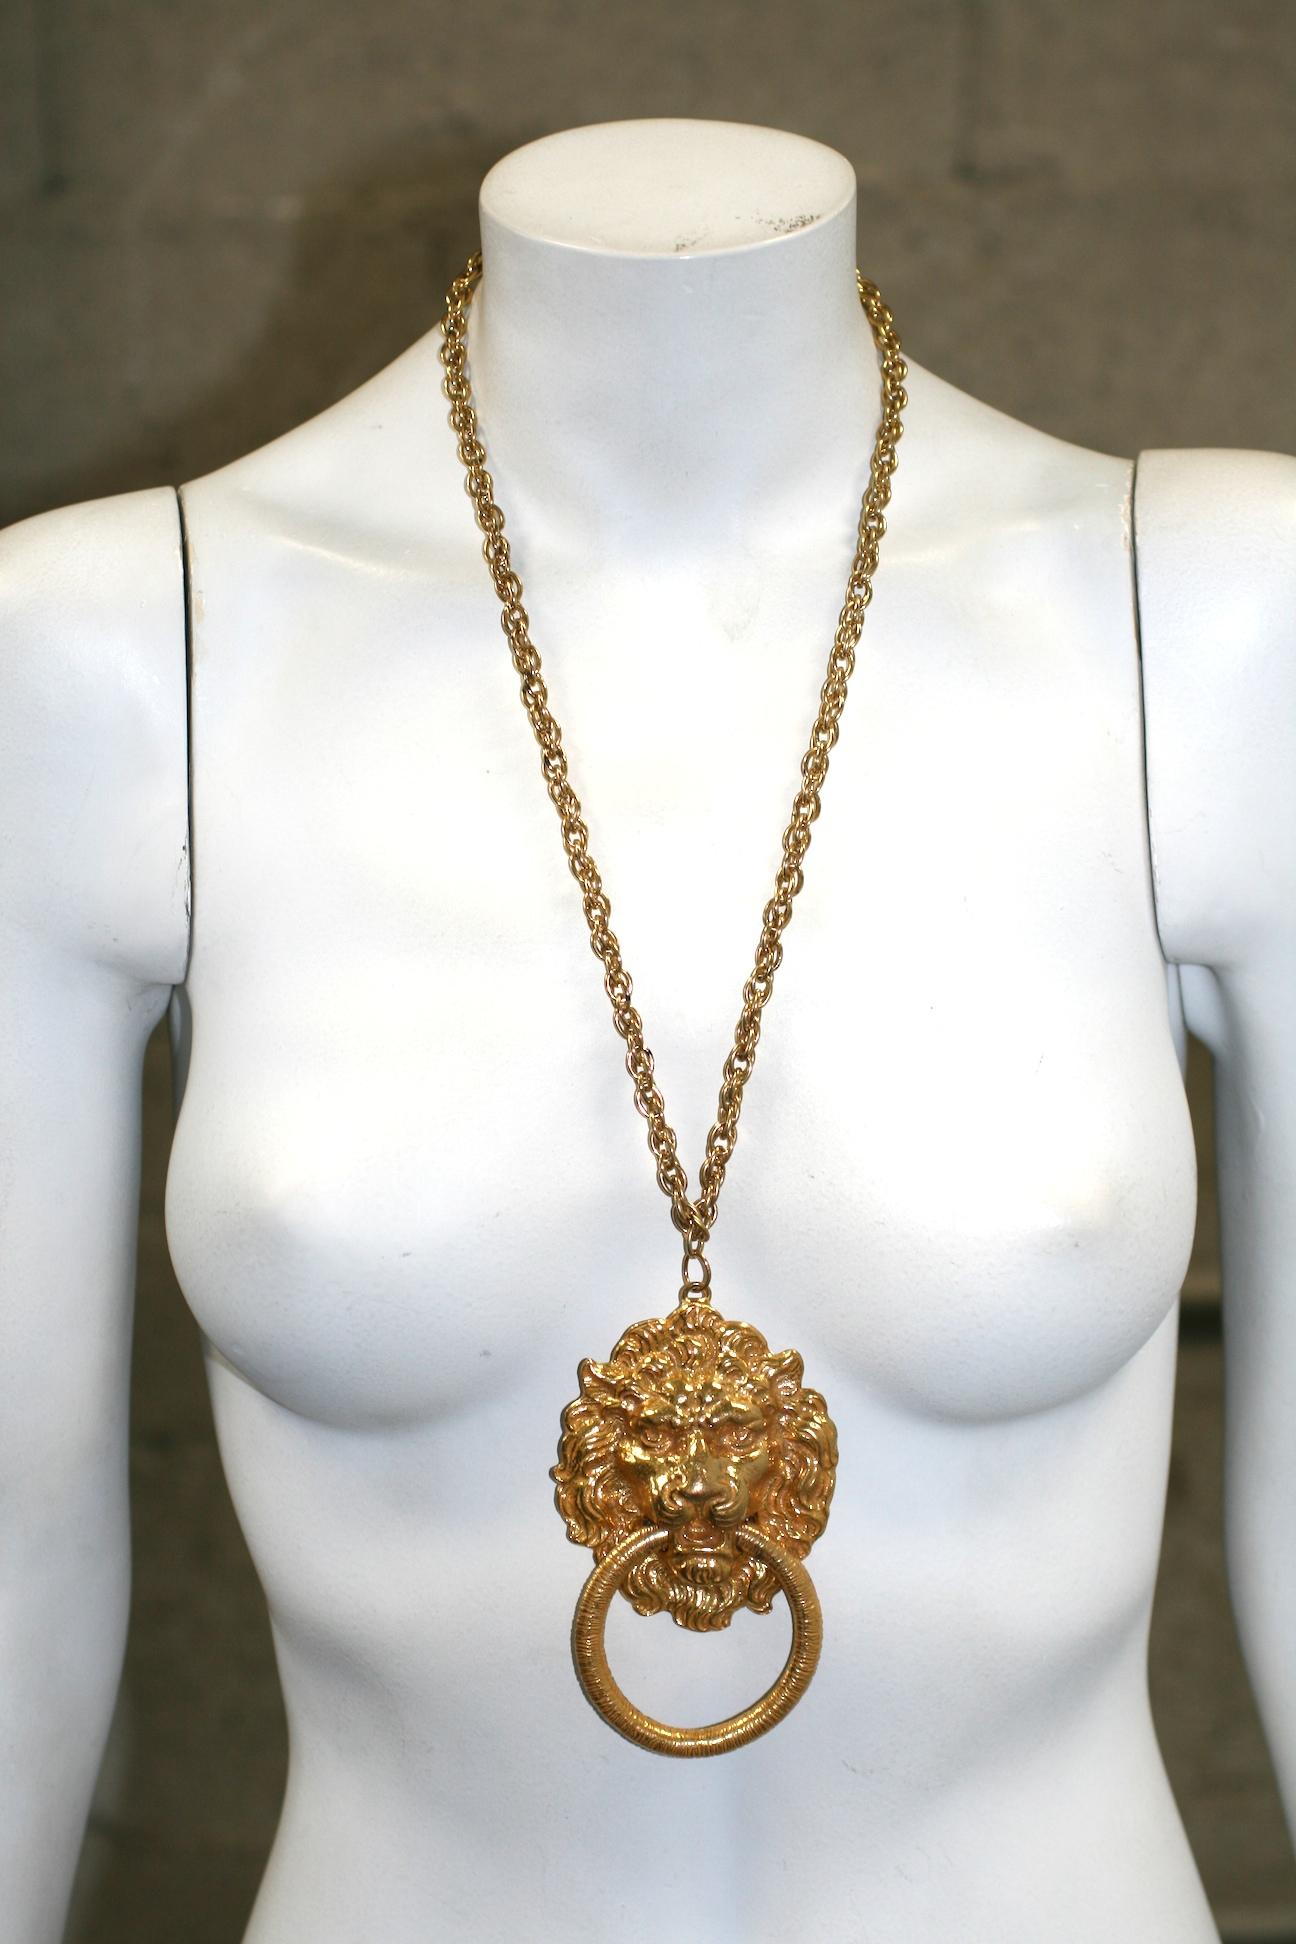 Polcini Lion's Head Pendant Necklace  In Excellent Condition For Sale In New York, NY